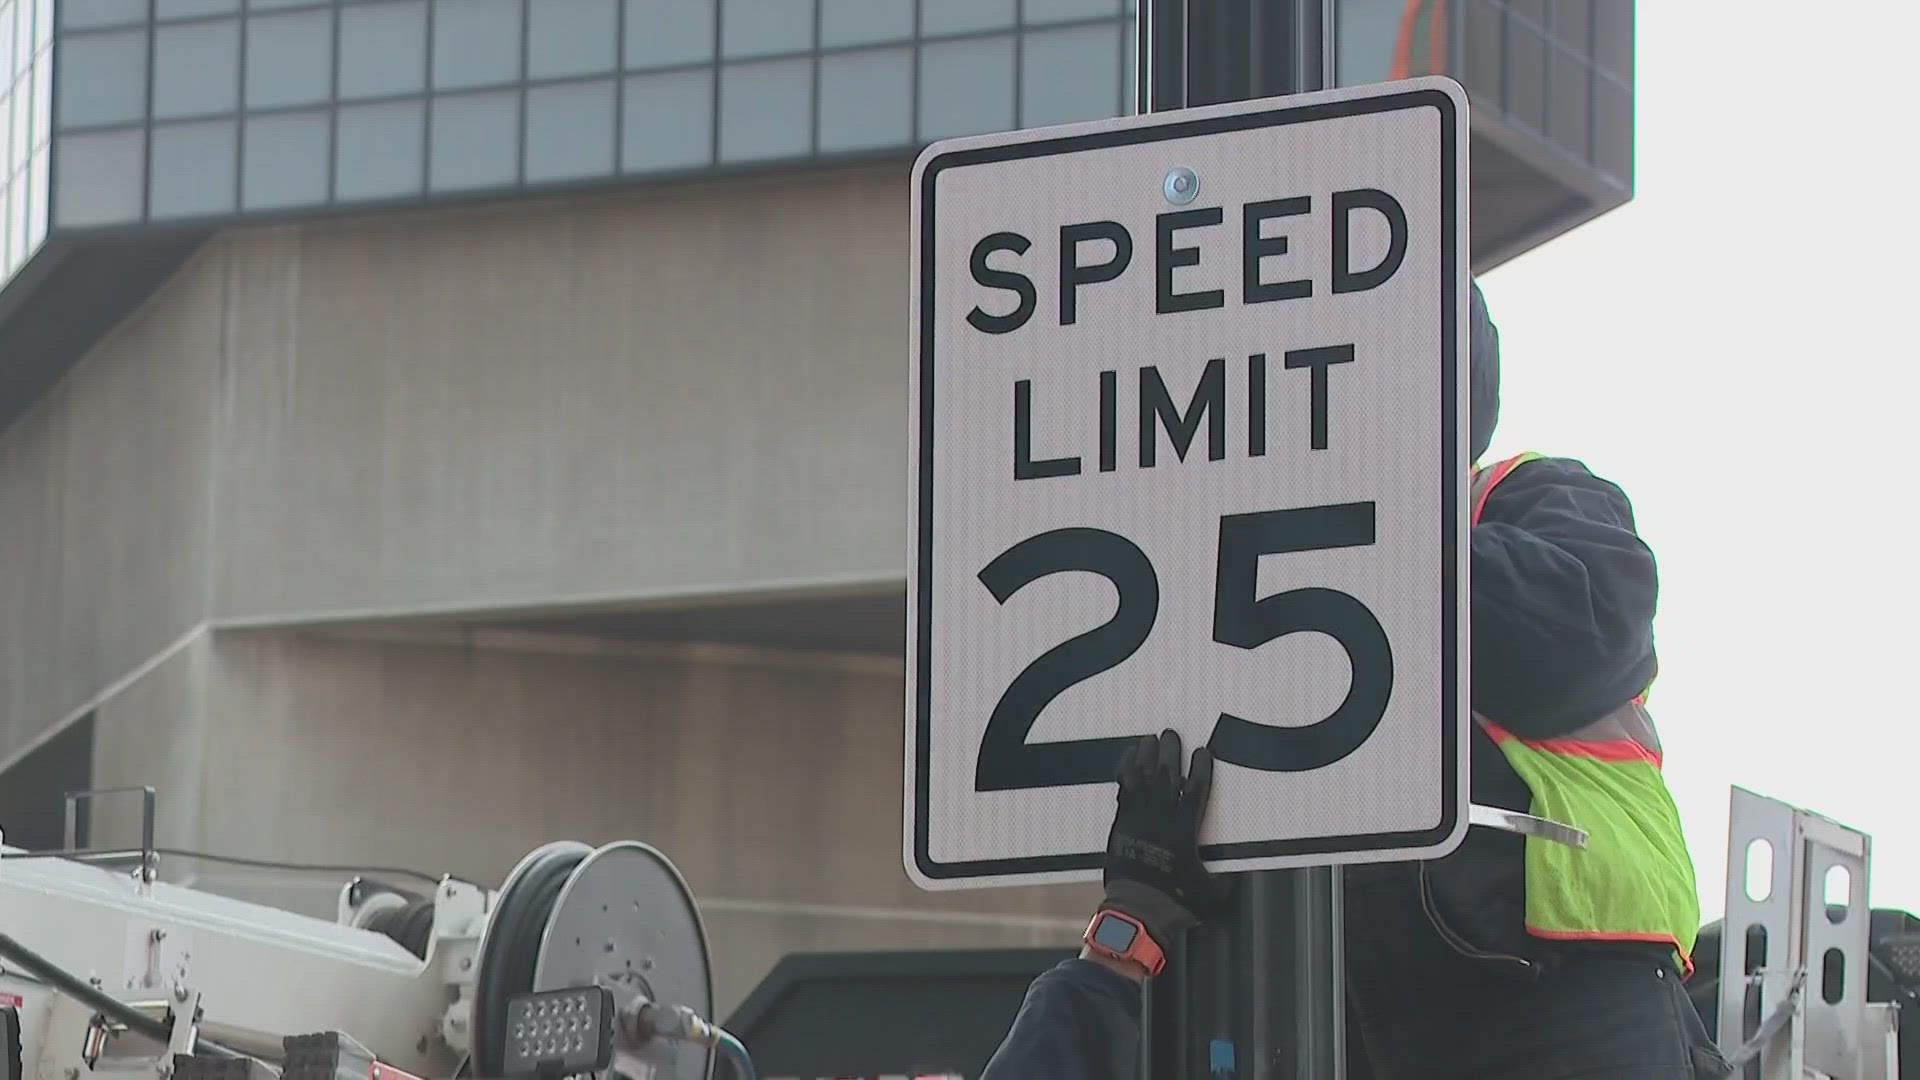 A reminder for drivers traveling through downtown Columbus as the speed limit has officially been reduced to 25 mph.